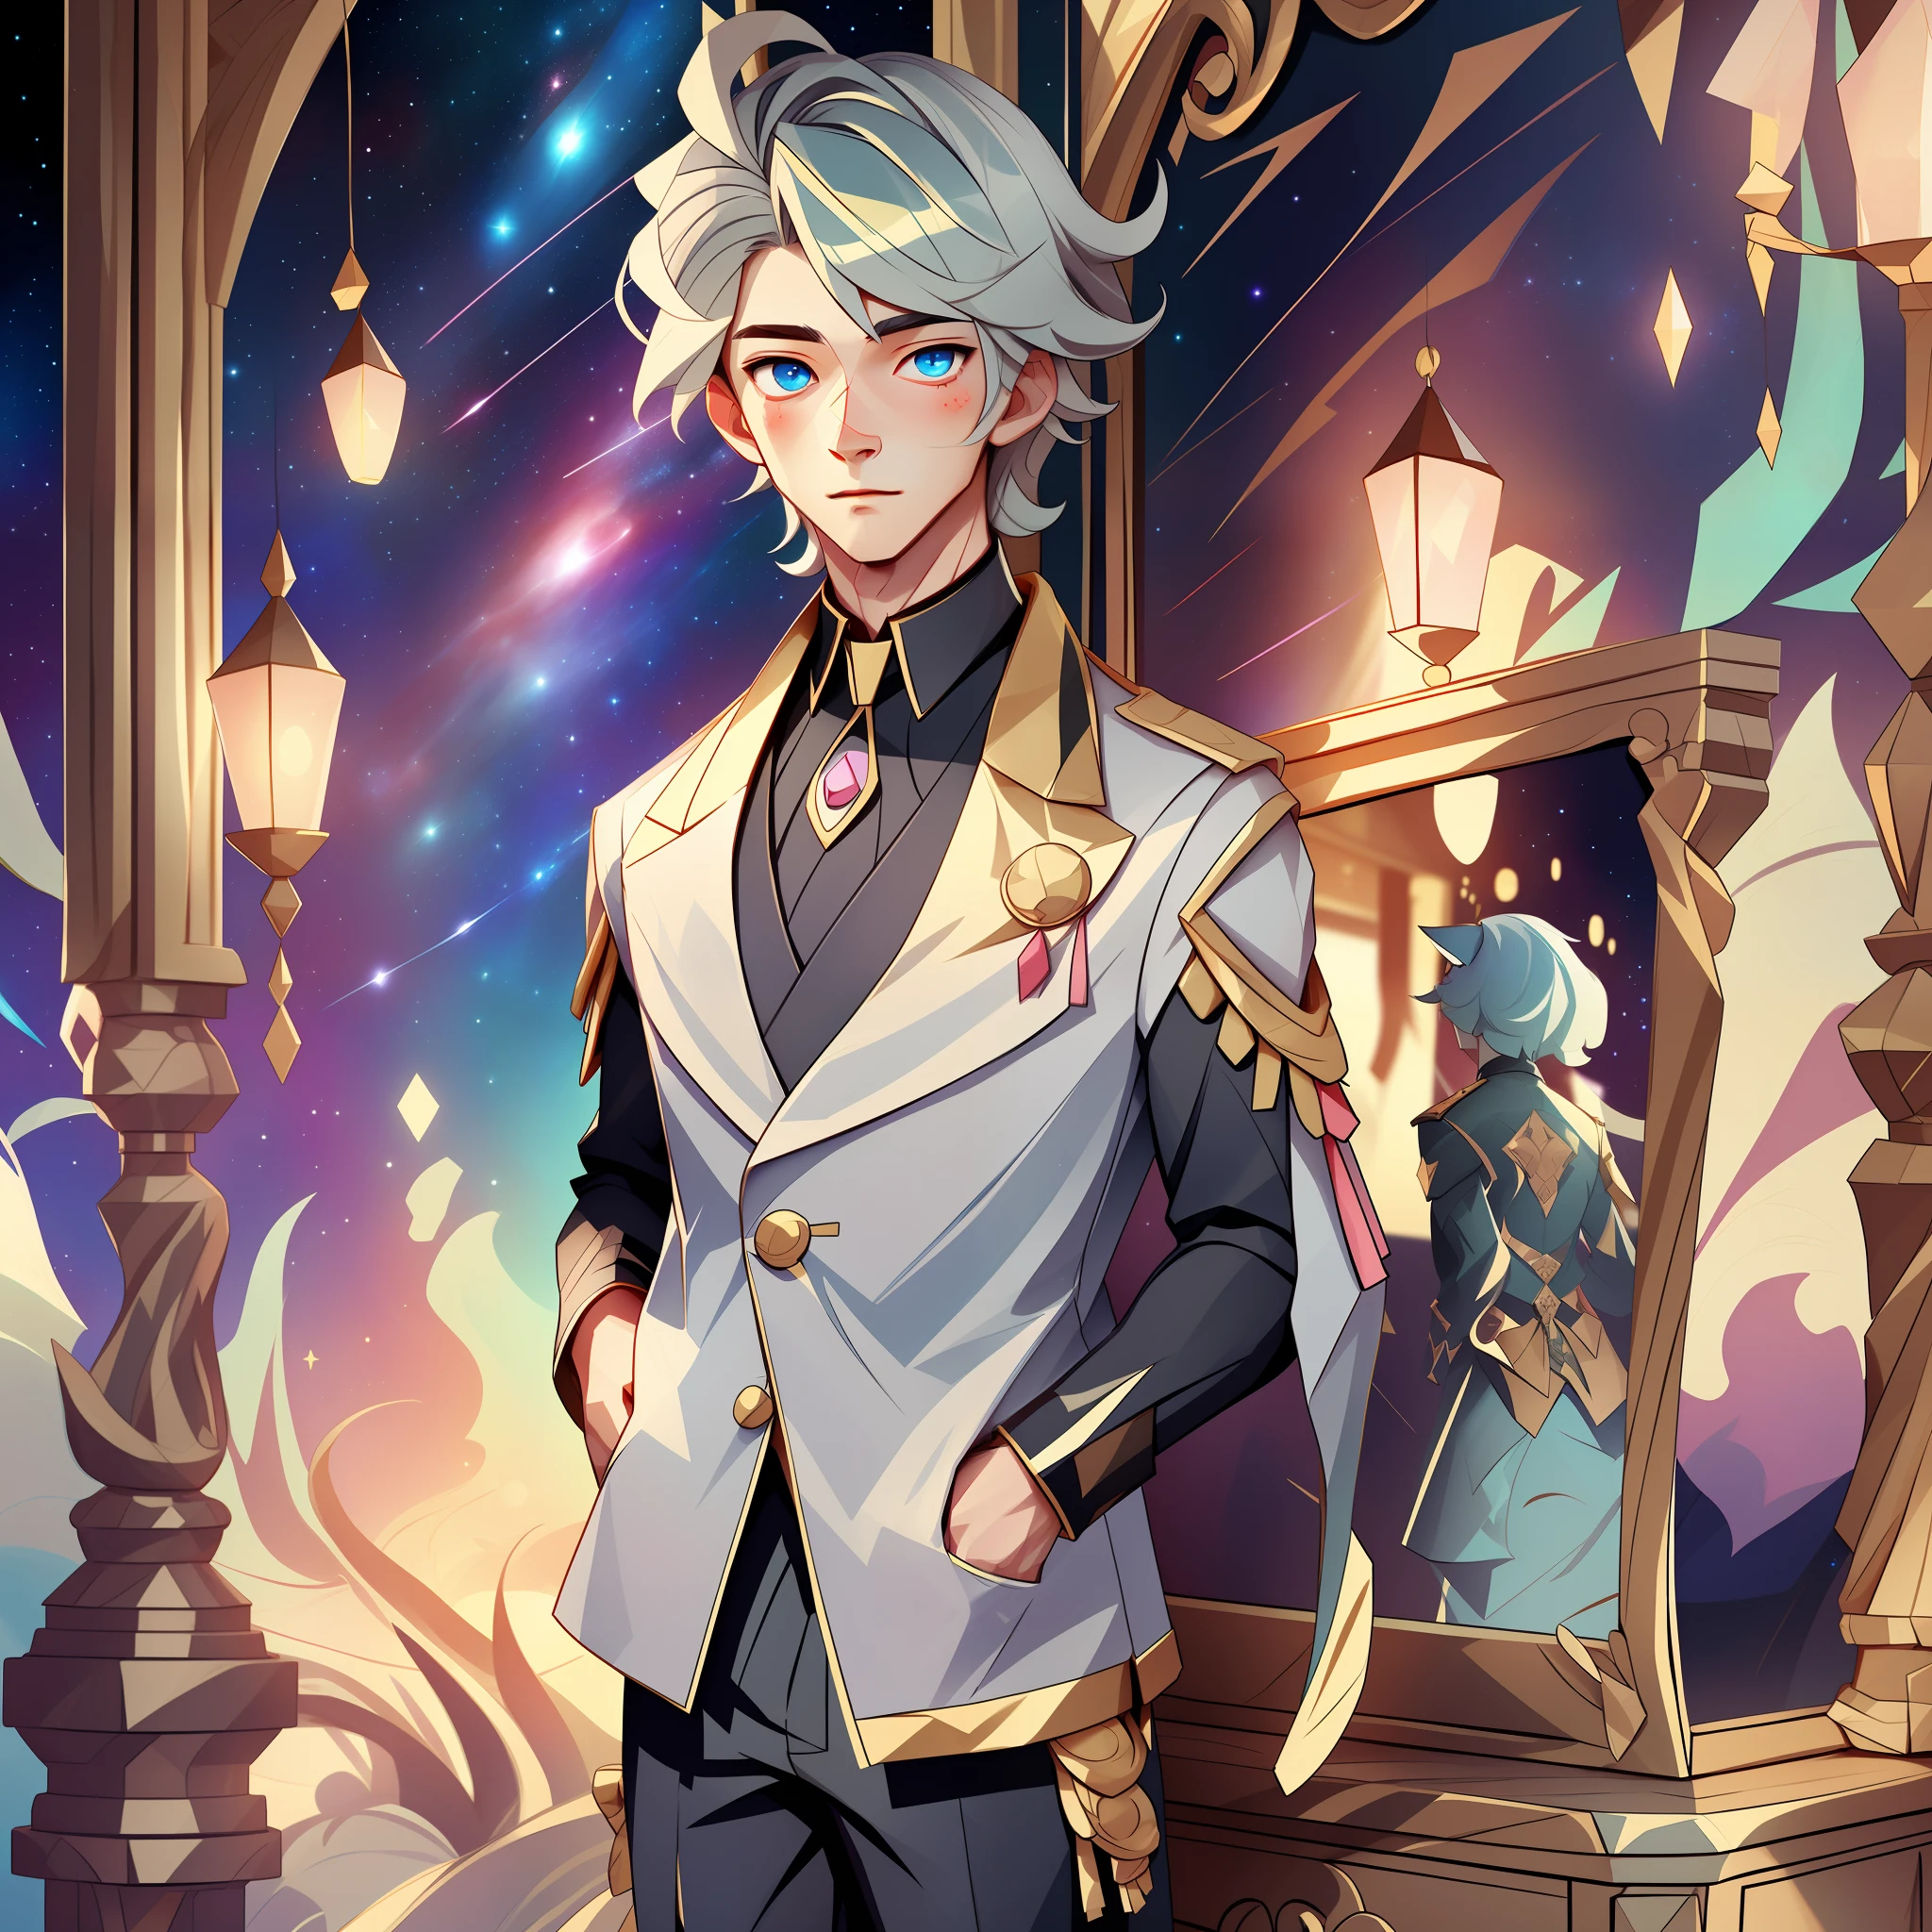 Masterpiece, 1 boy, nekomimi, hair gradient with the feeling of starry sky, the main body is self-color, there is dull hair, blushing, galaxy eyes, intrincated details, cute boy, young Man